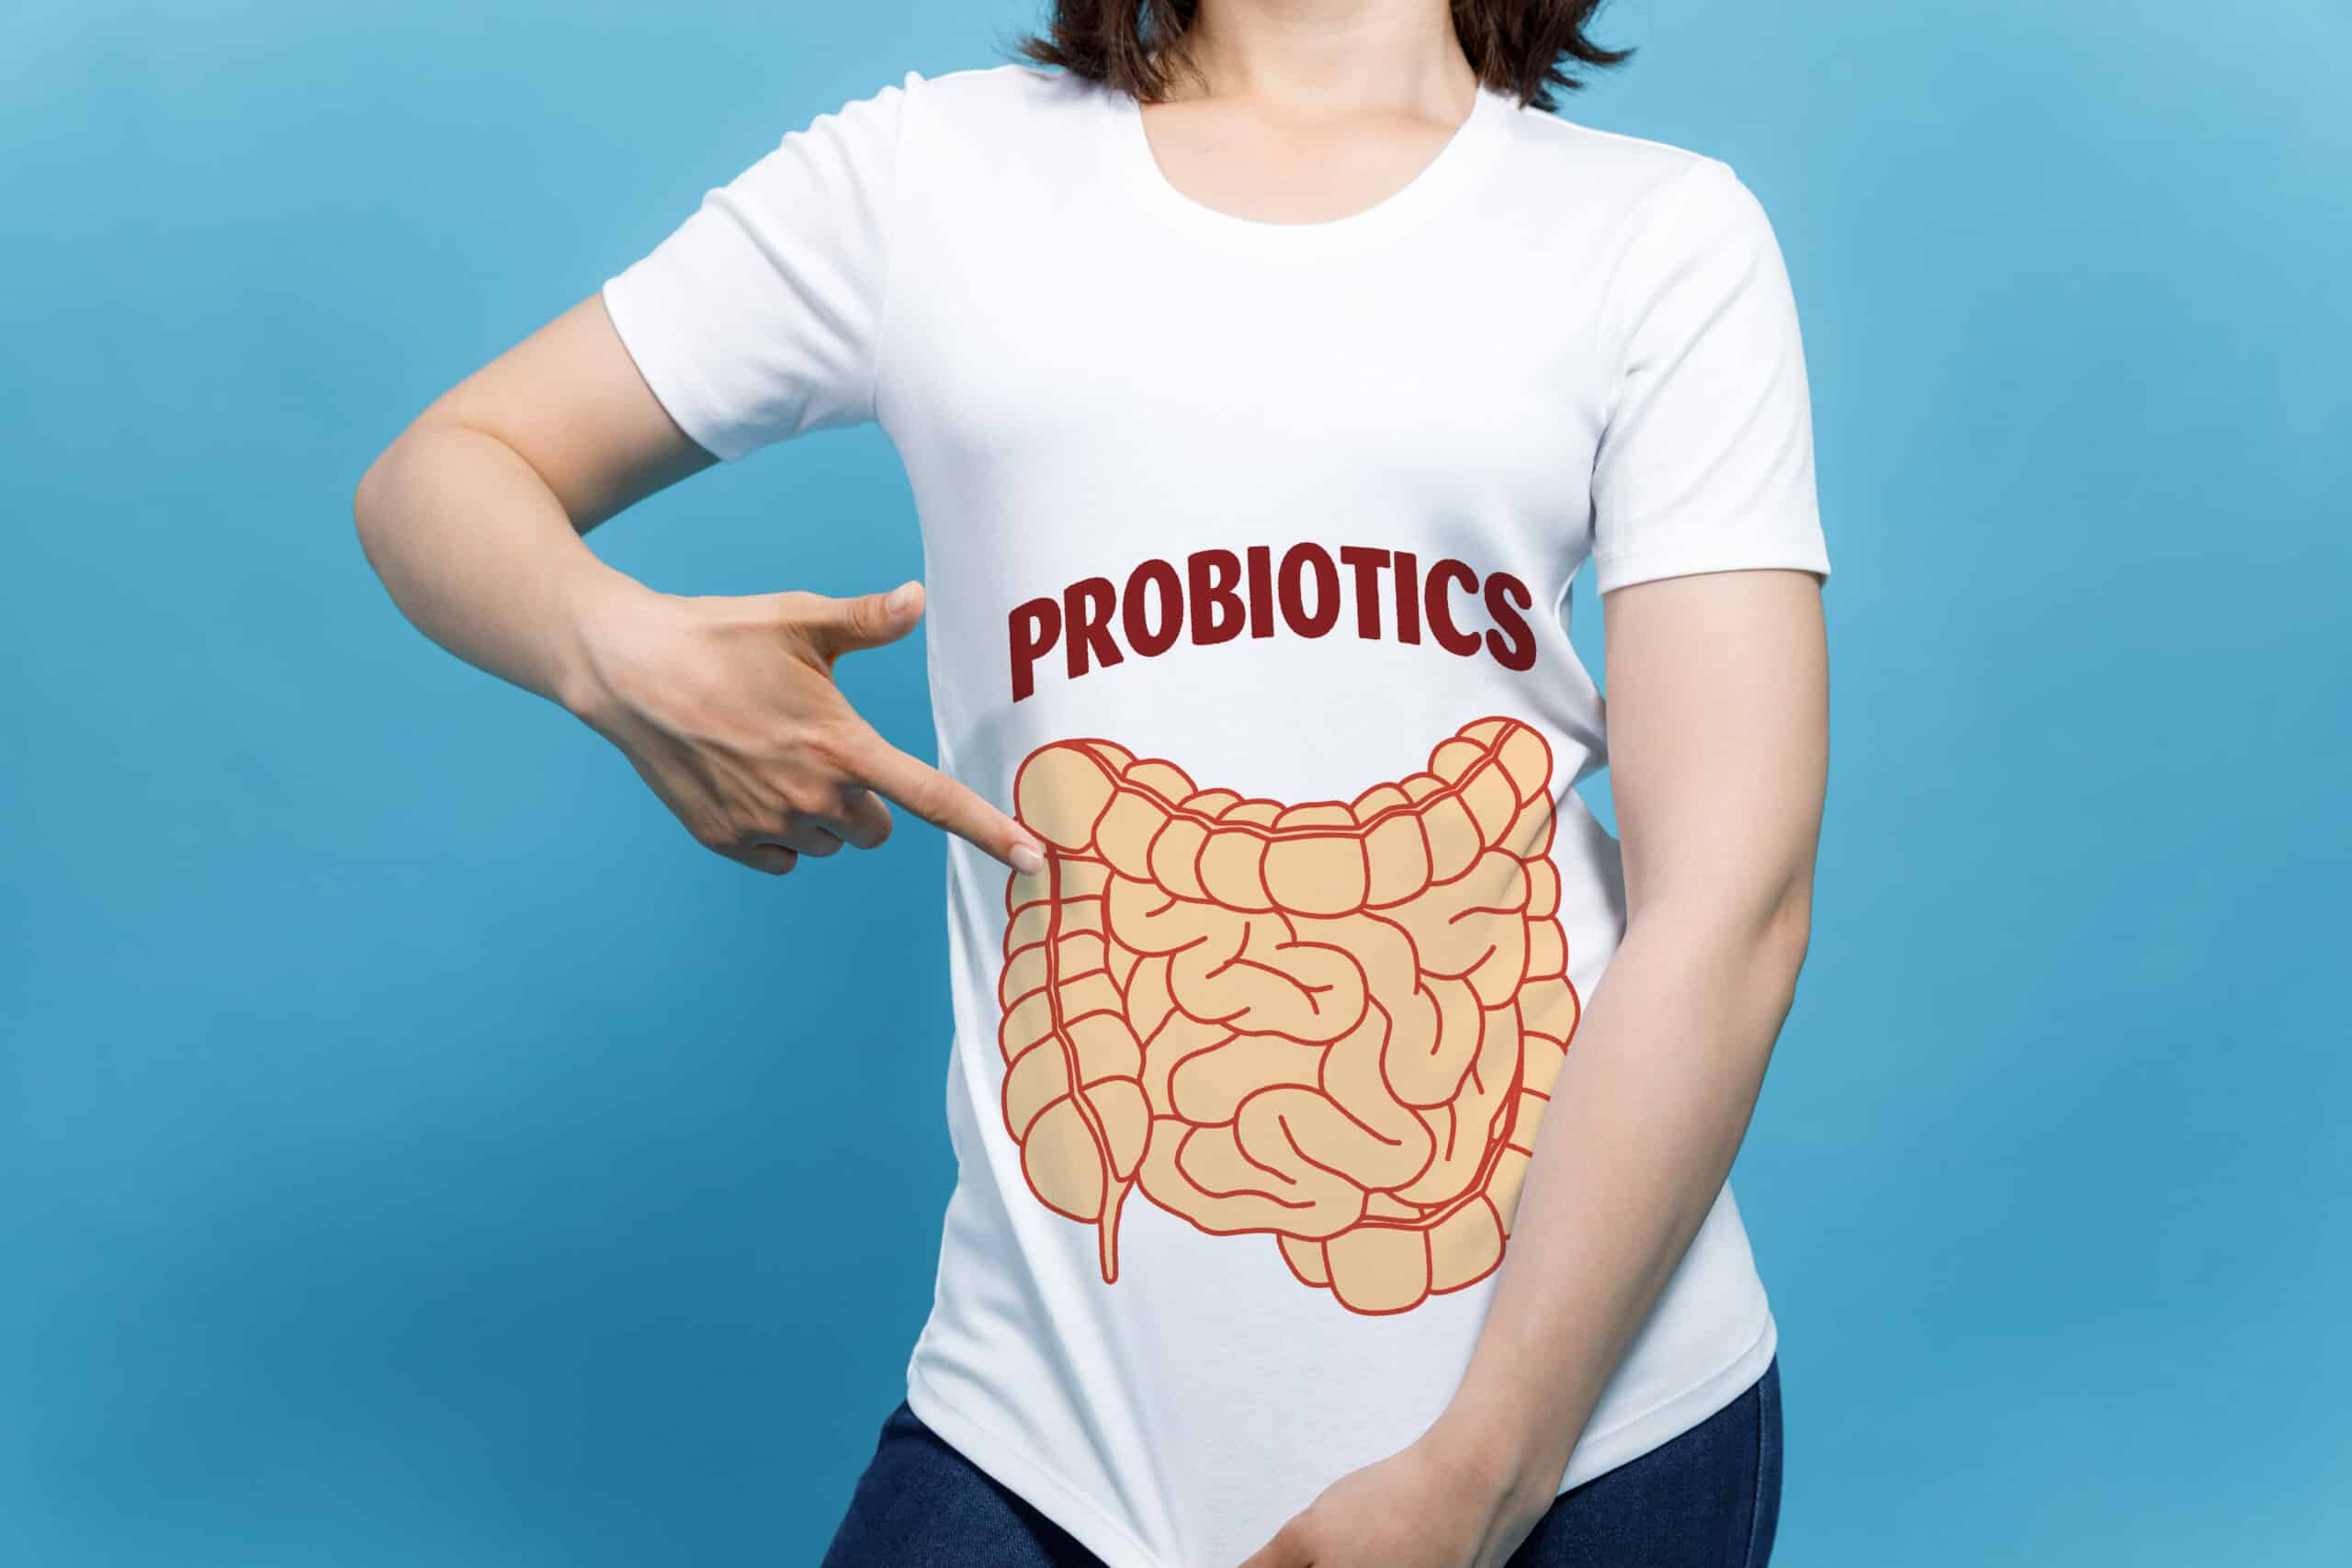 Probiotic ‘backpacks’ show promise for treating inflammatory bowel diseases